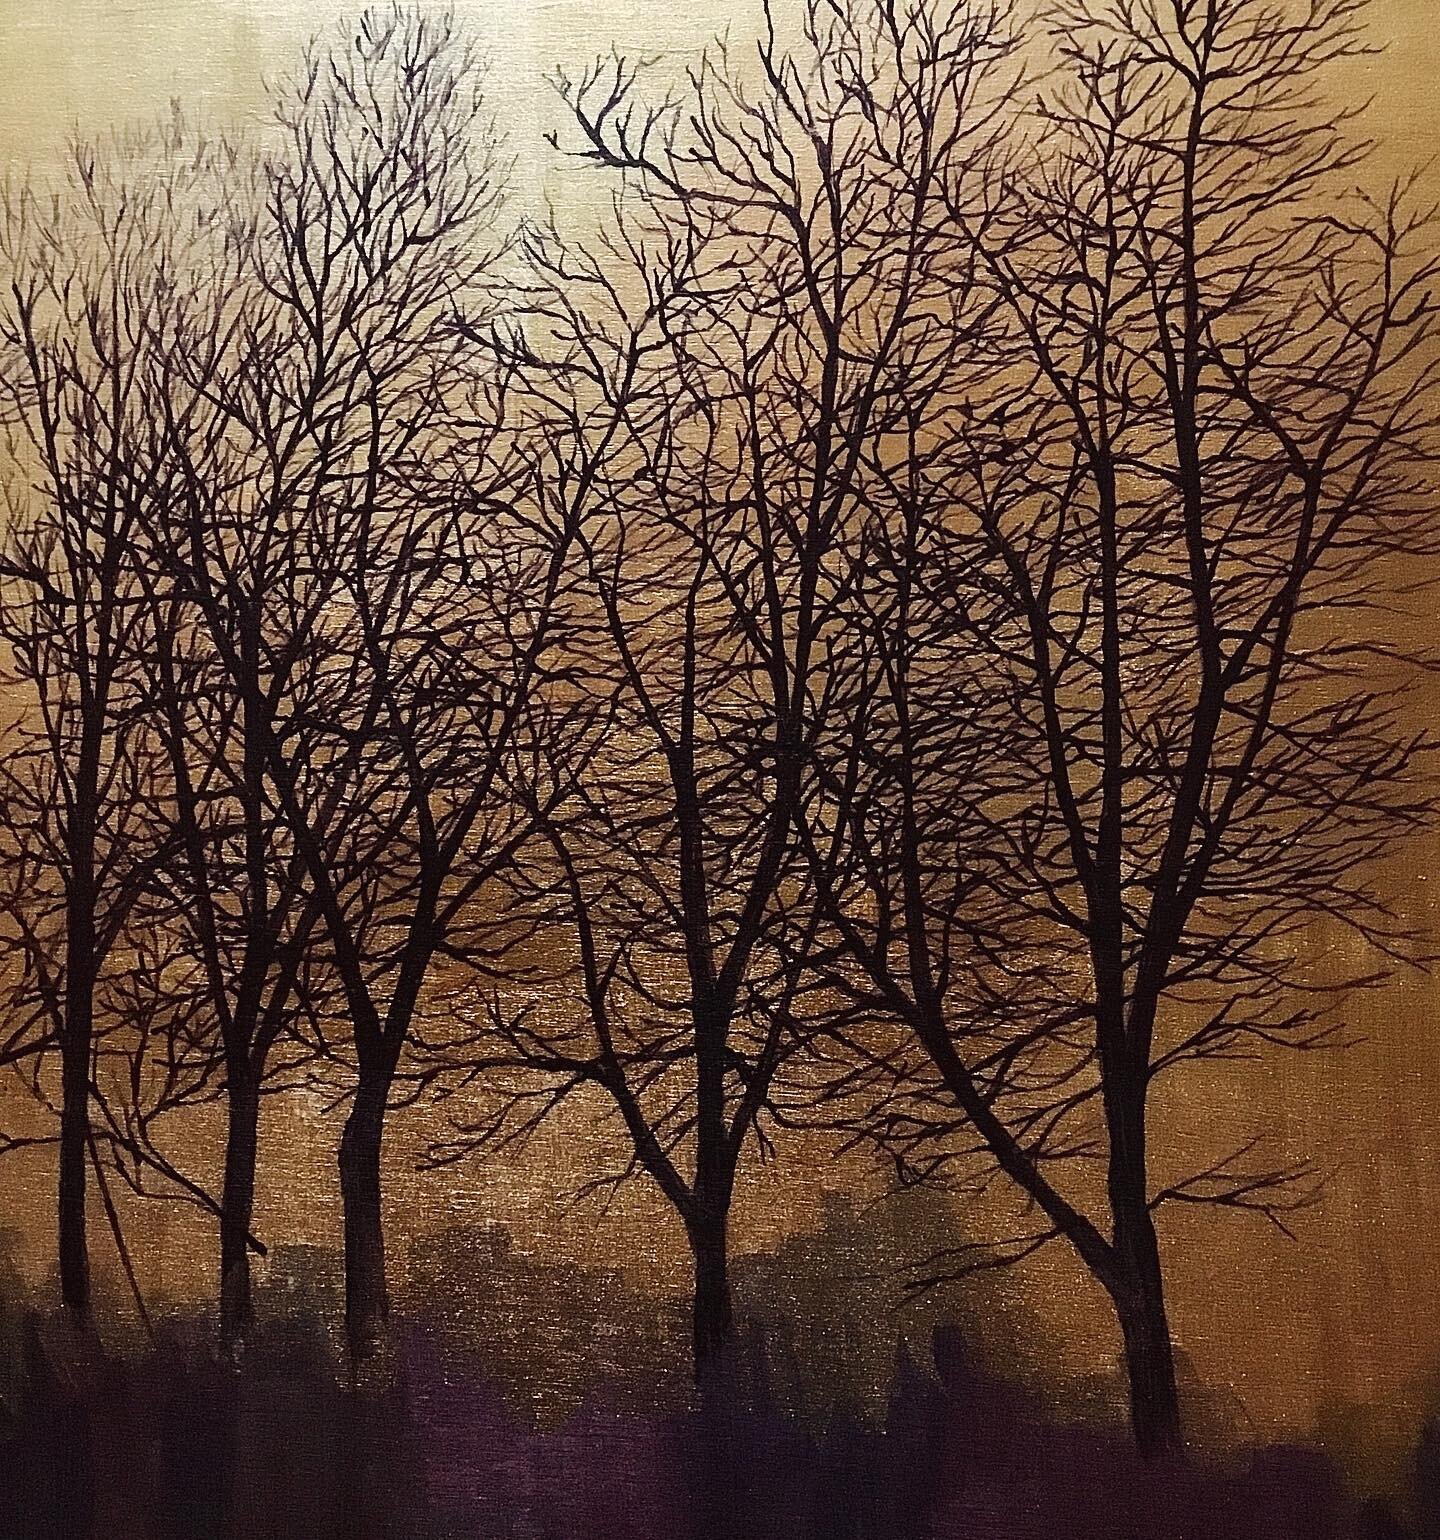 Detail from &lsquo;Golden Hour&rsquo; from a while back. Love the shimmering gold in this painting. 🤩 wishing you all a beautiful weekend 🤩🌟. #golden #wintertrees #sunset #weekendvibes